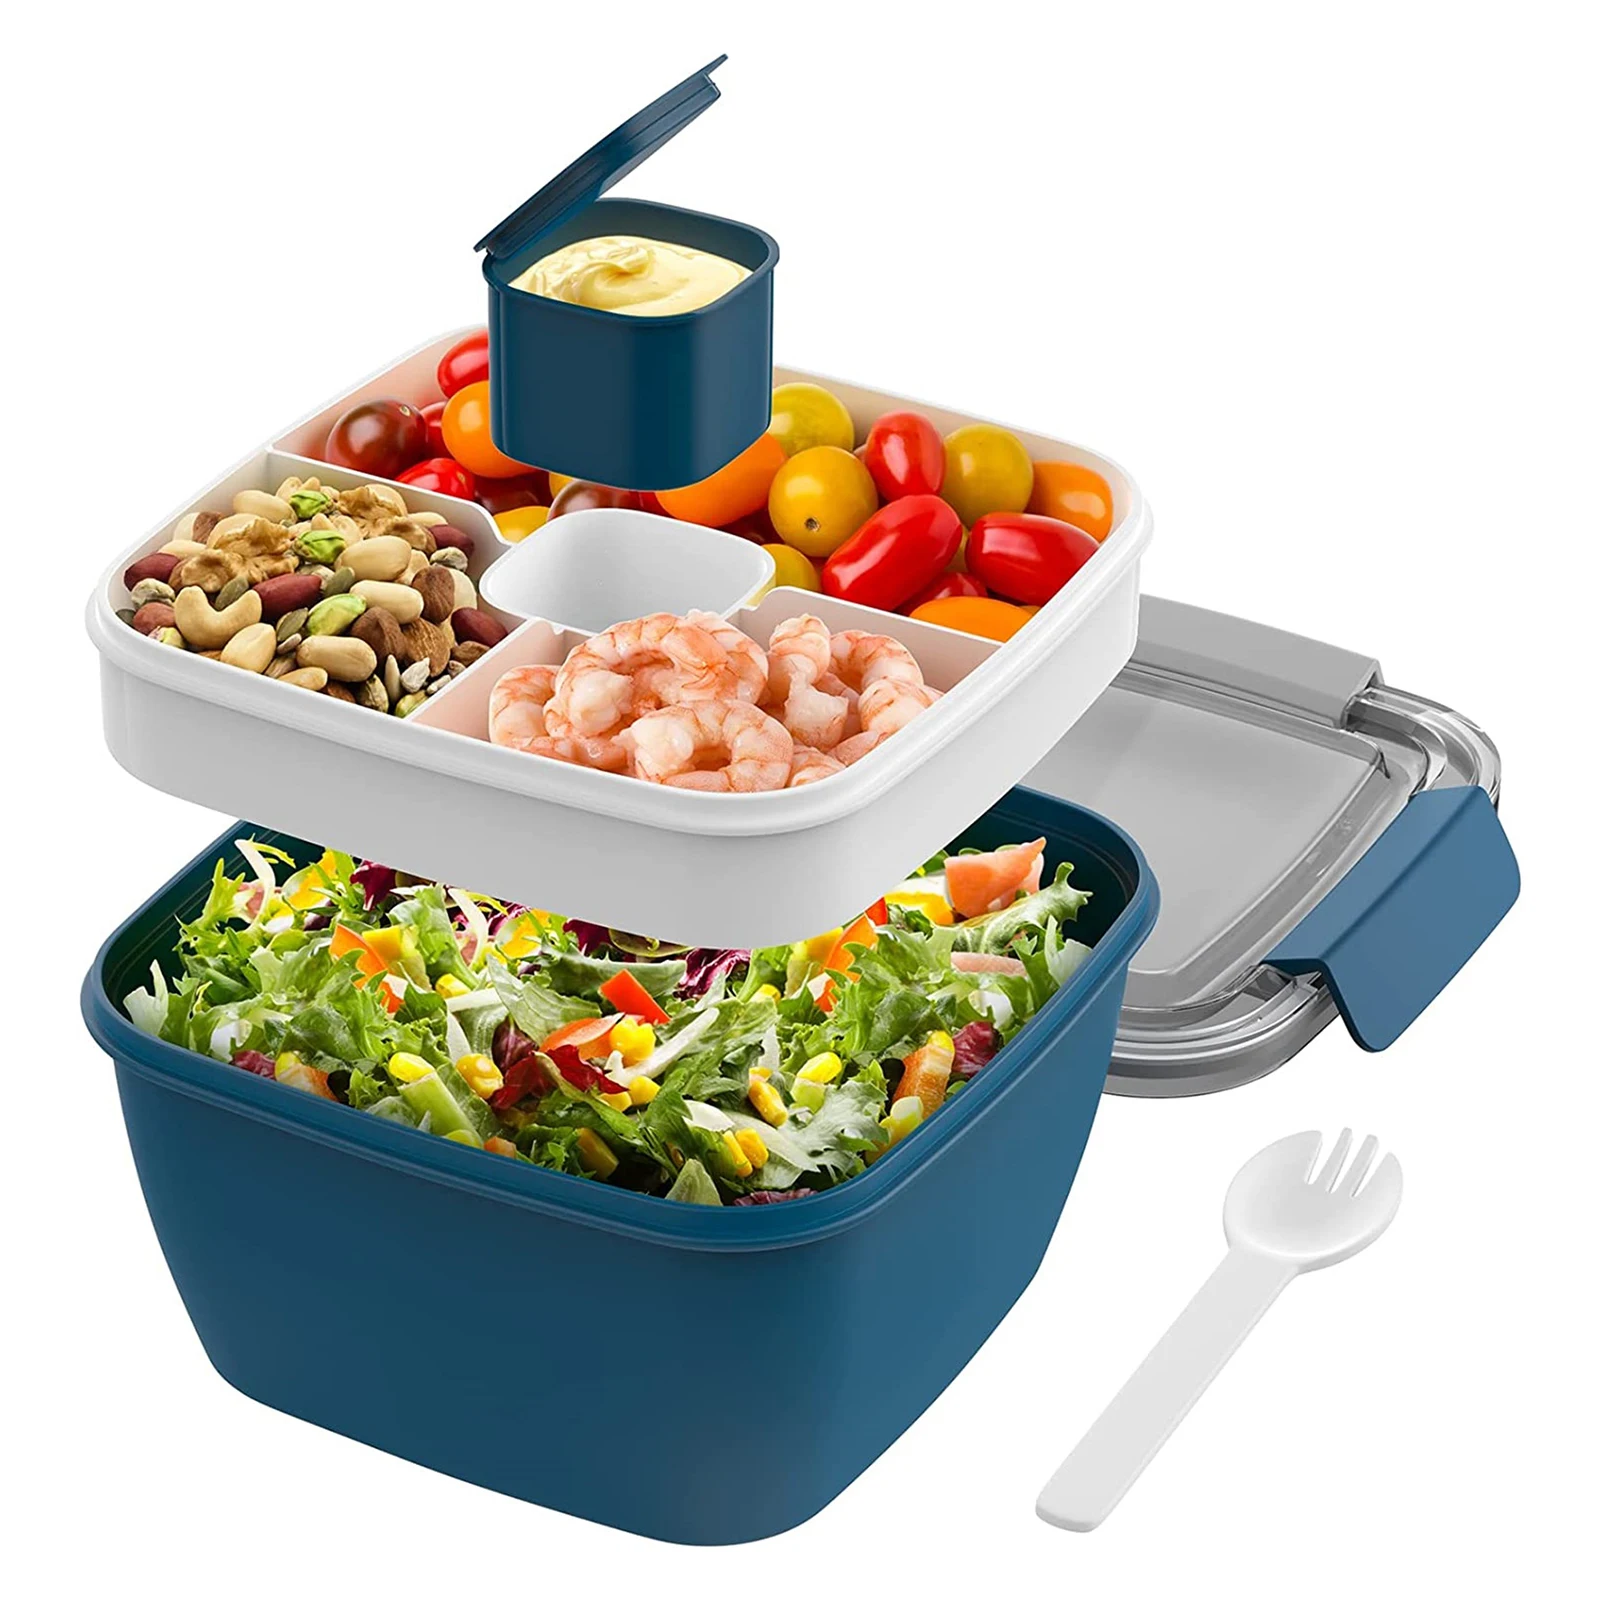 

Salad Container For Lunch Leak-Proof Salad Container Box Bento Lunch Box With Large 52-oz Salad Bowl 3-Compartment Tray For